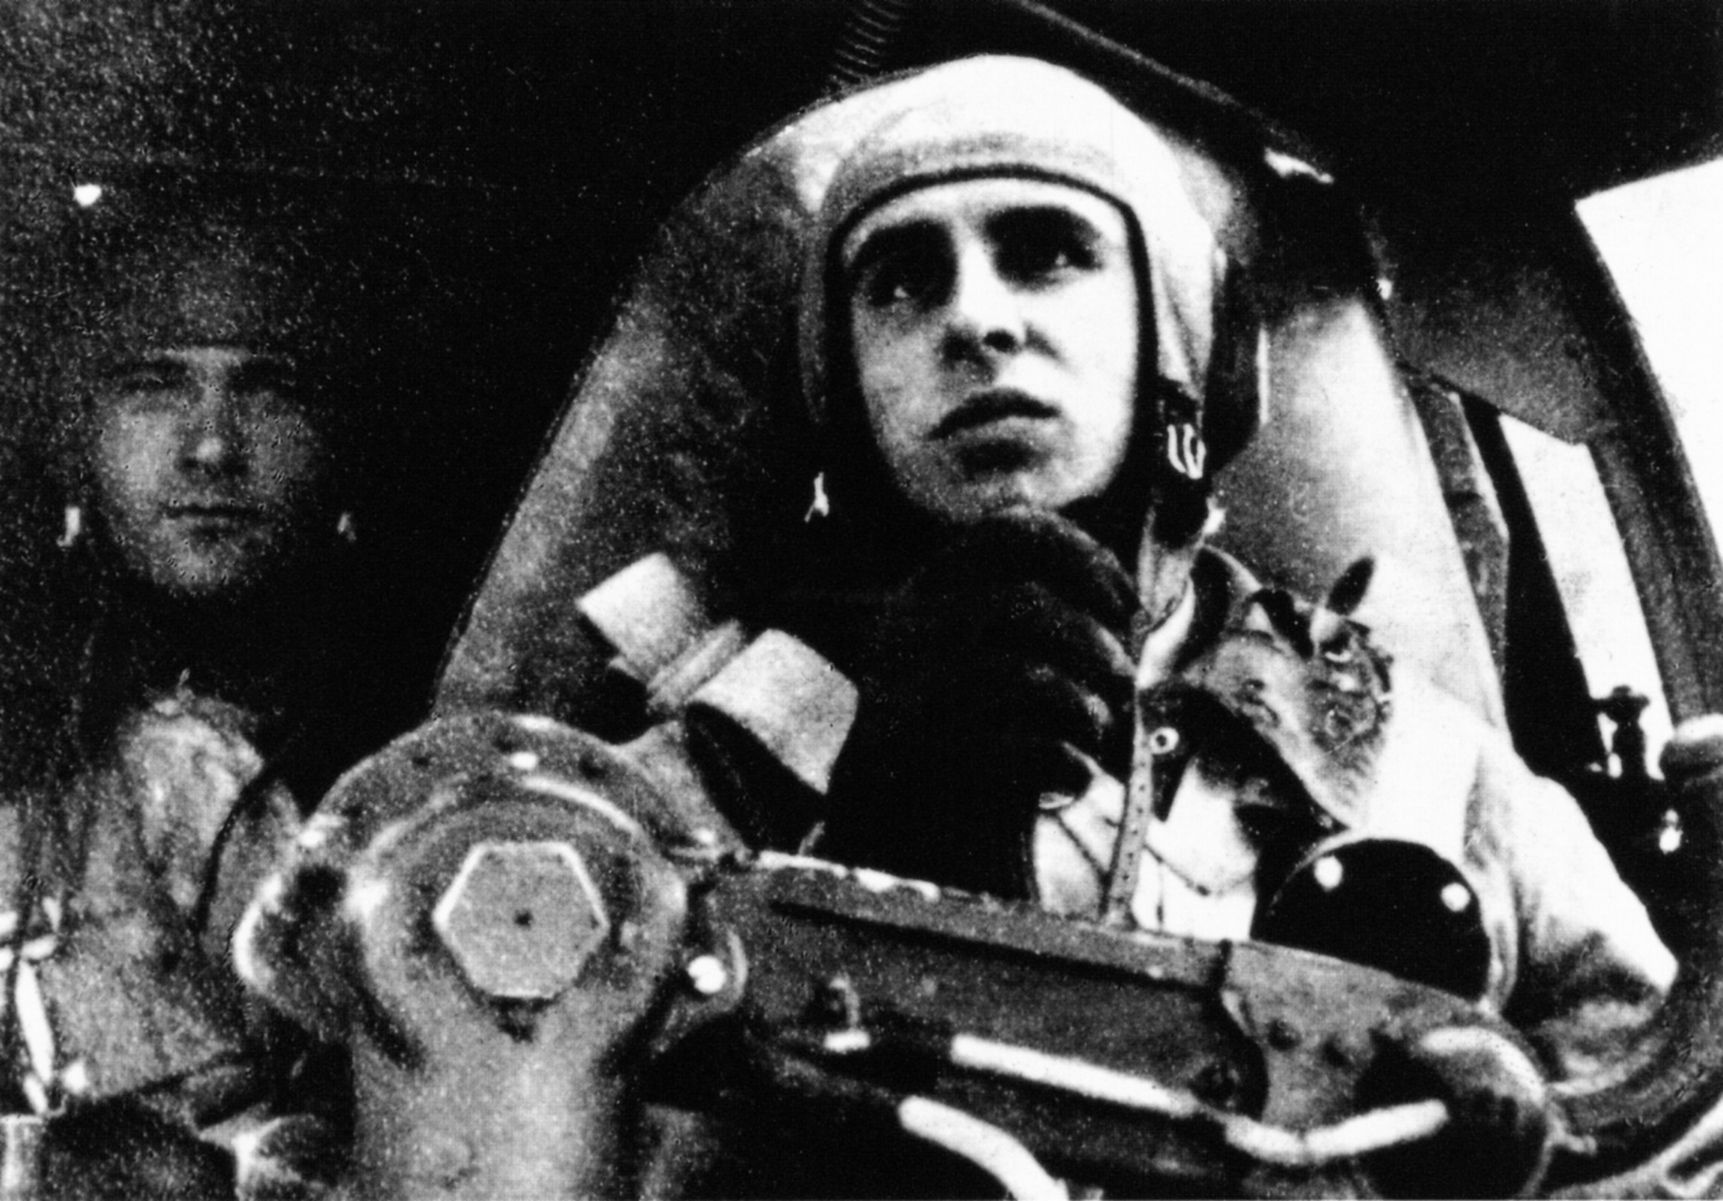 Luftwaffe Lieutenant Karl-Heinz Thurz pilots a Heinkel He-111 bomber during an air raid on Great Britain. Originally developed under the guise of a passenger airline, the He-111 was a workhorse of the German bomber force.